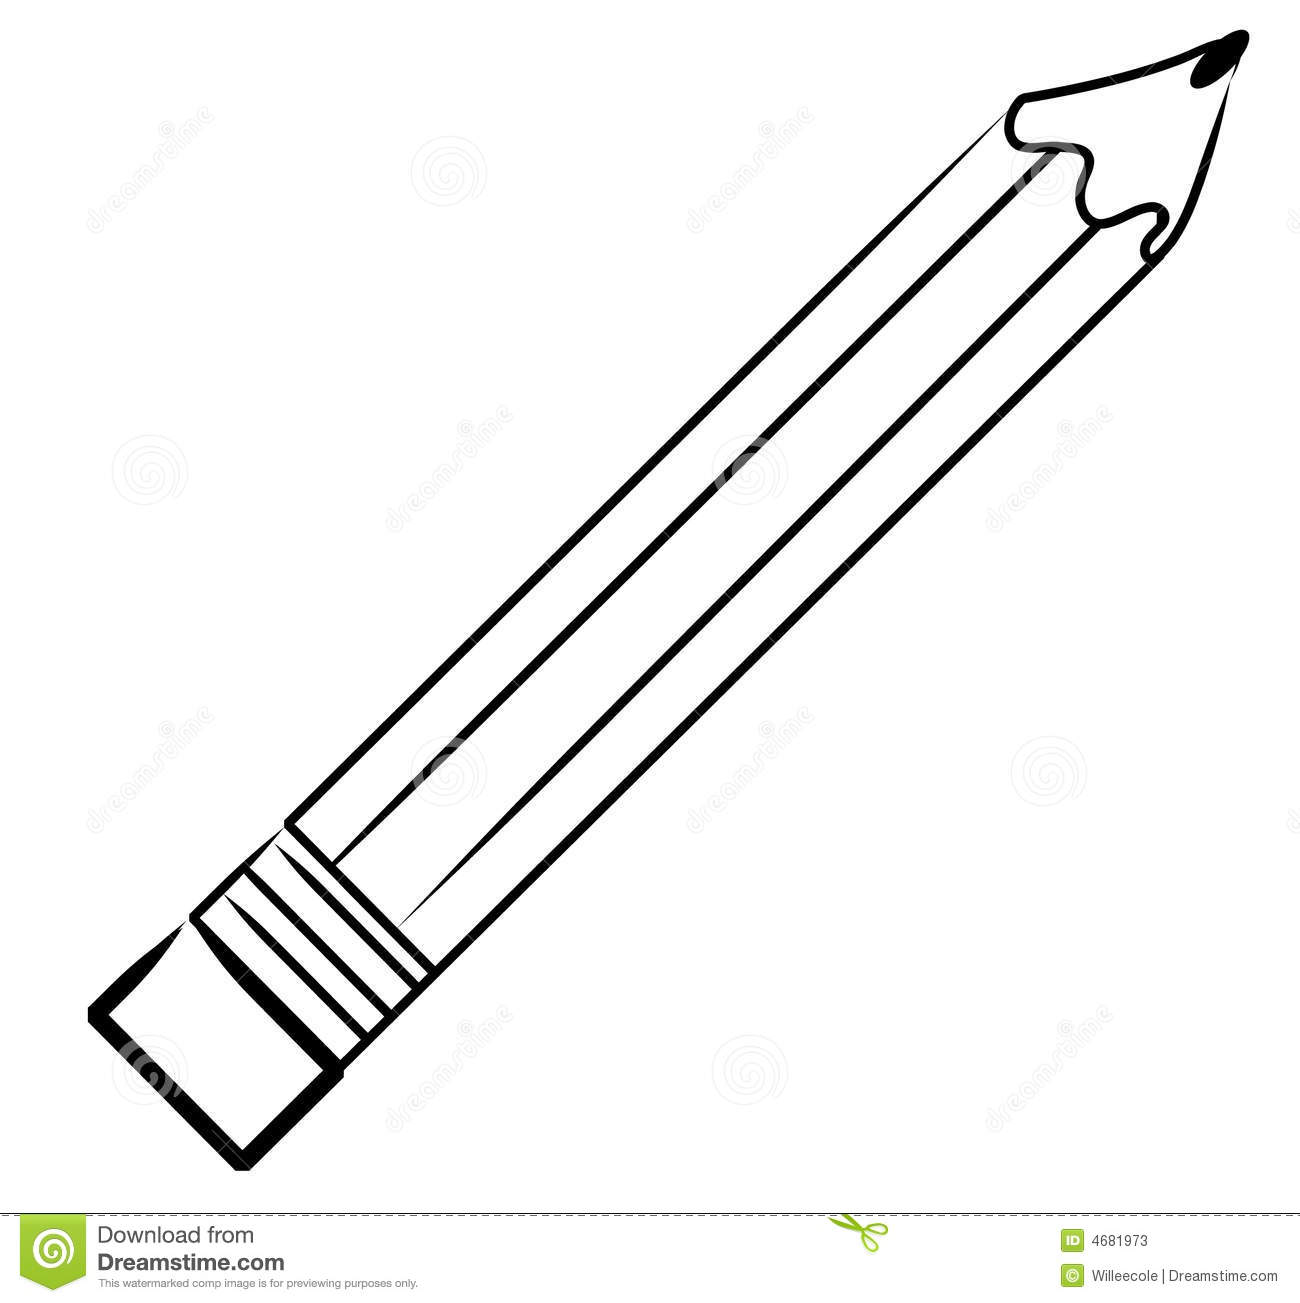 Outline Of Stationary Pencil On White Background   Vector 